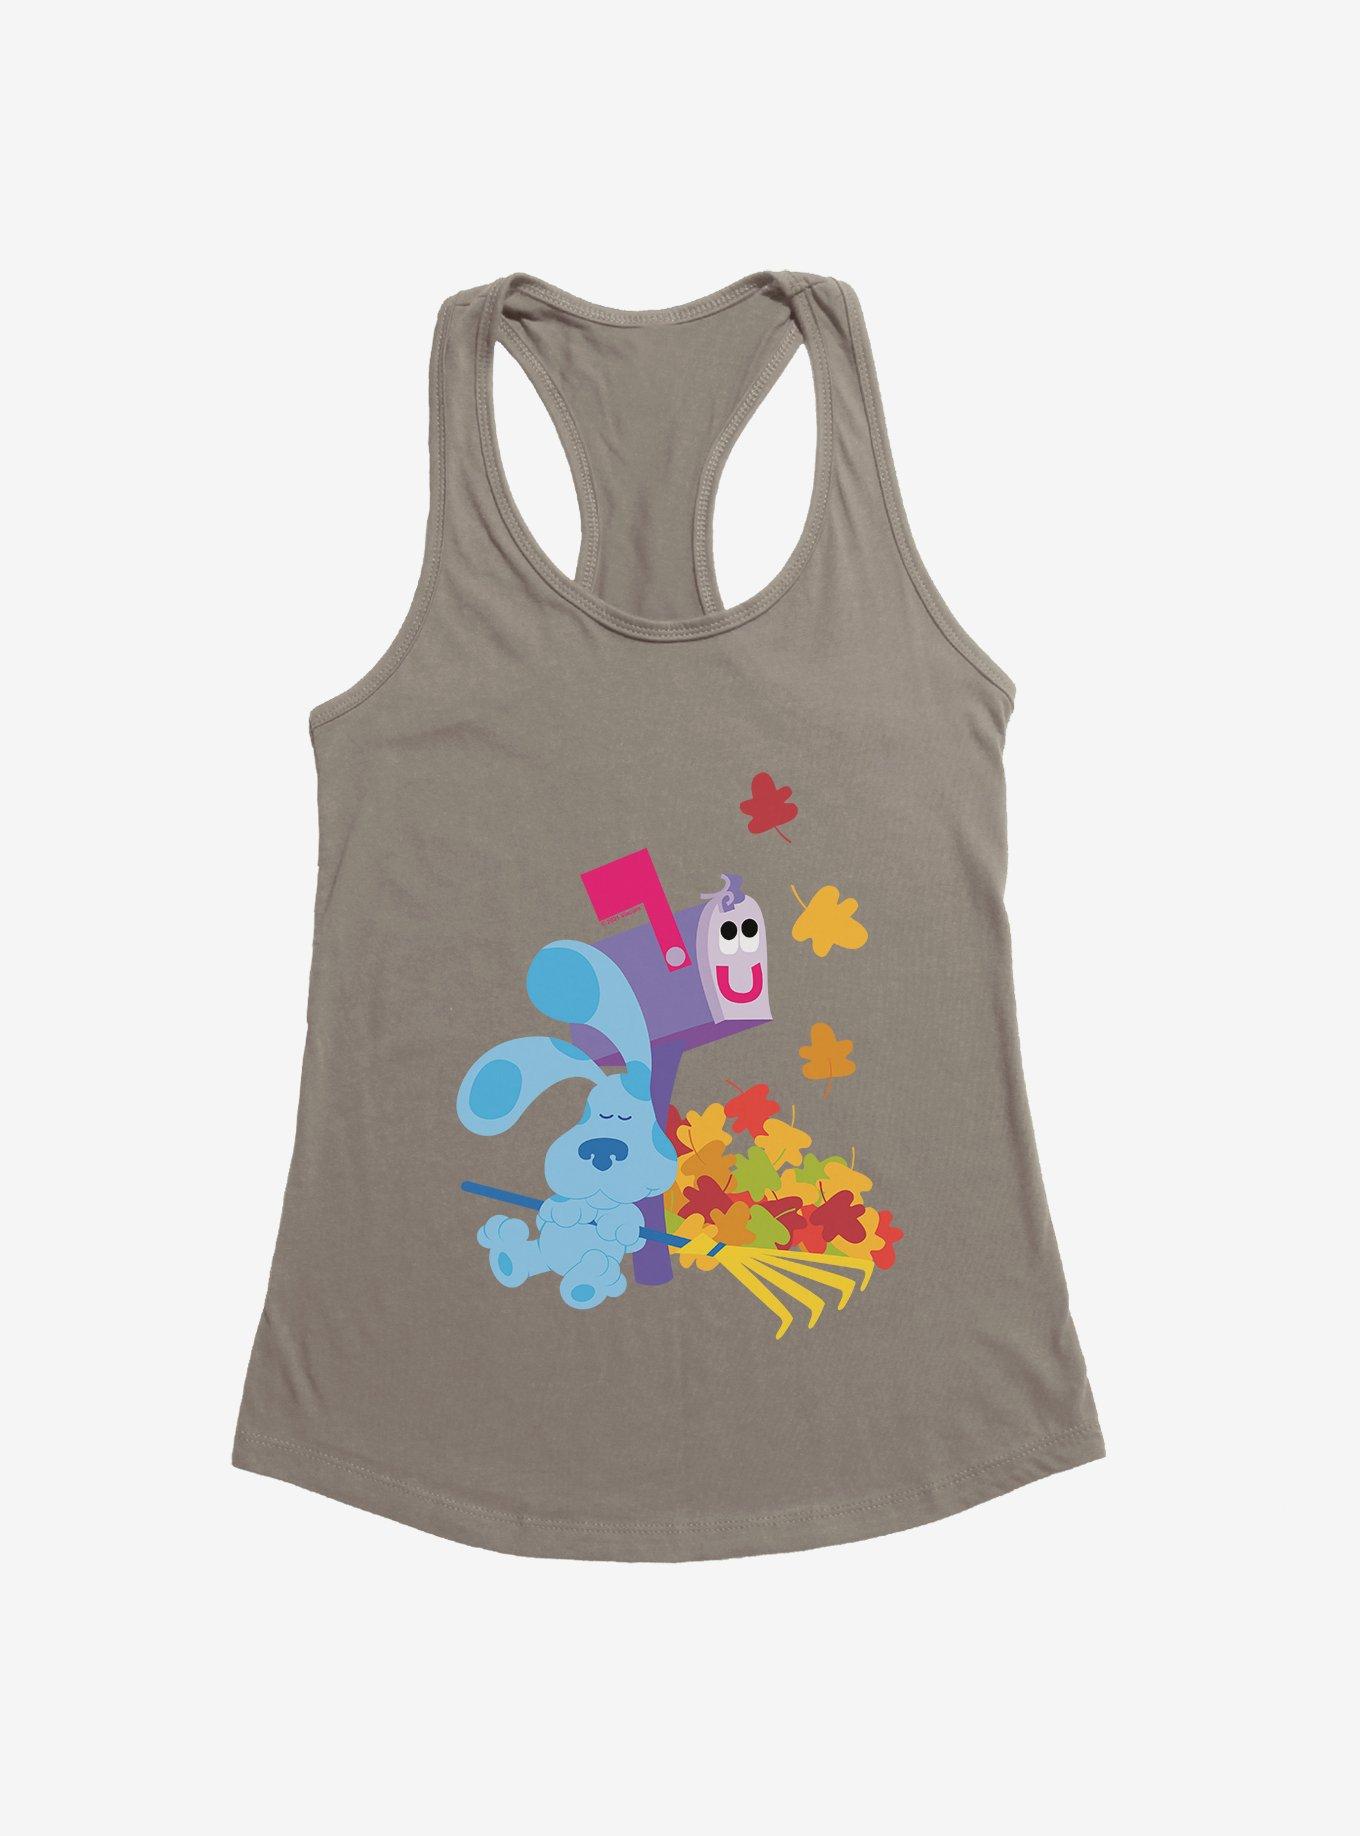 Blue's Clues Mailbox And Blue Autumn Leaves Girls Tank, WARM GRAY, hi-res